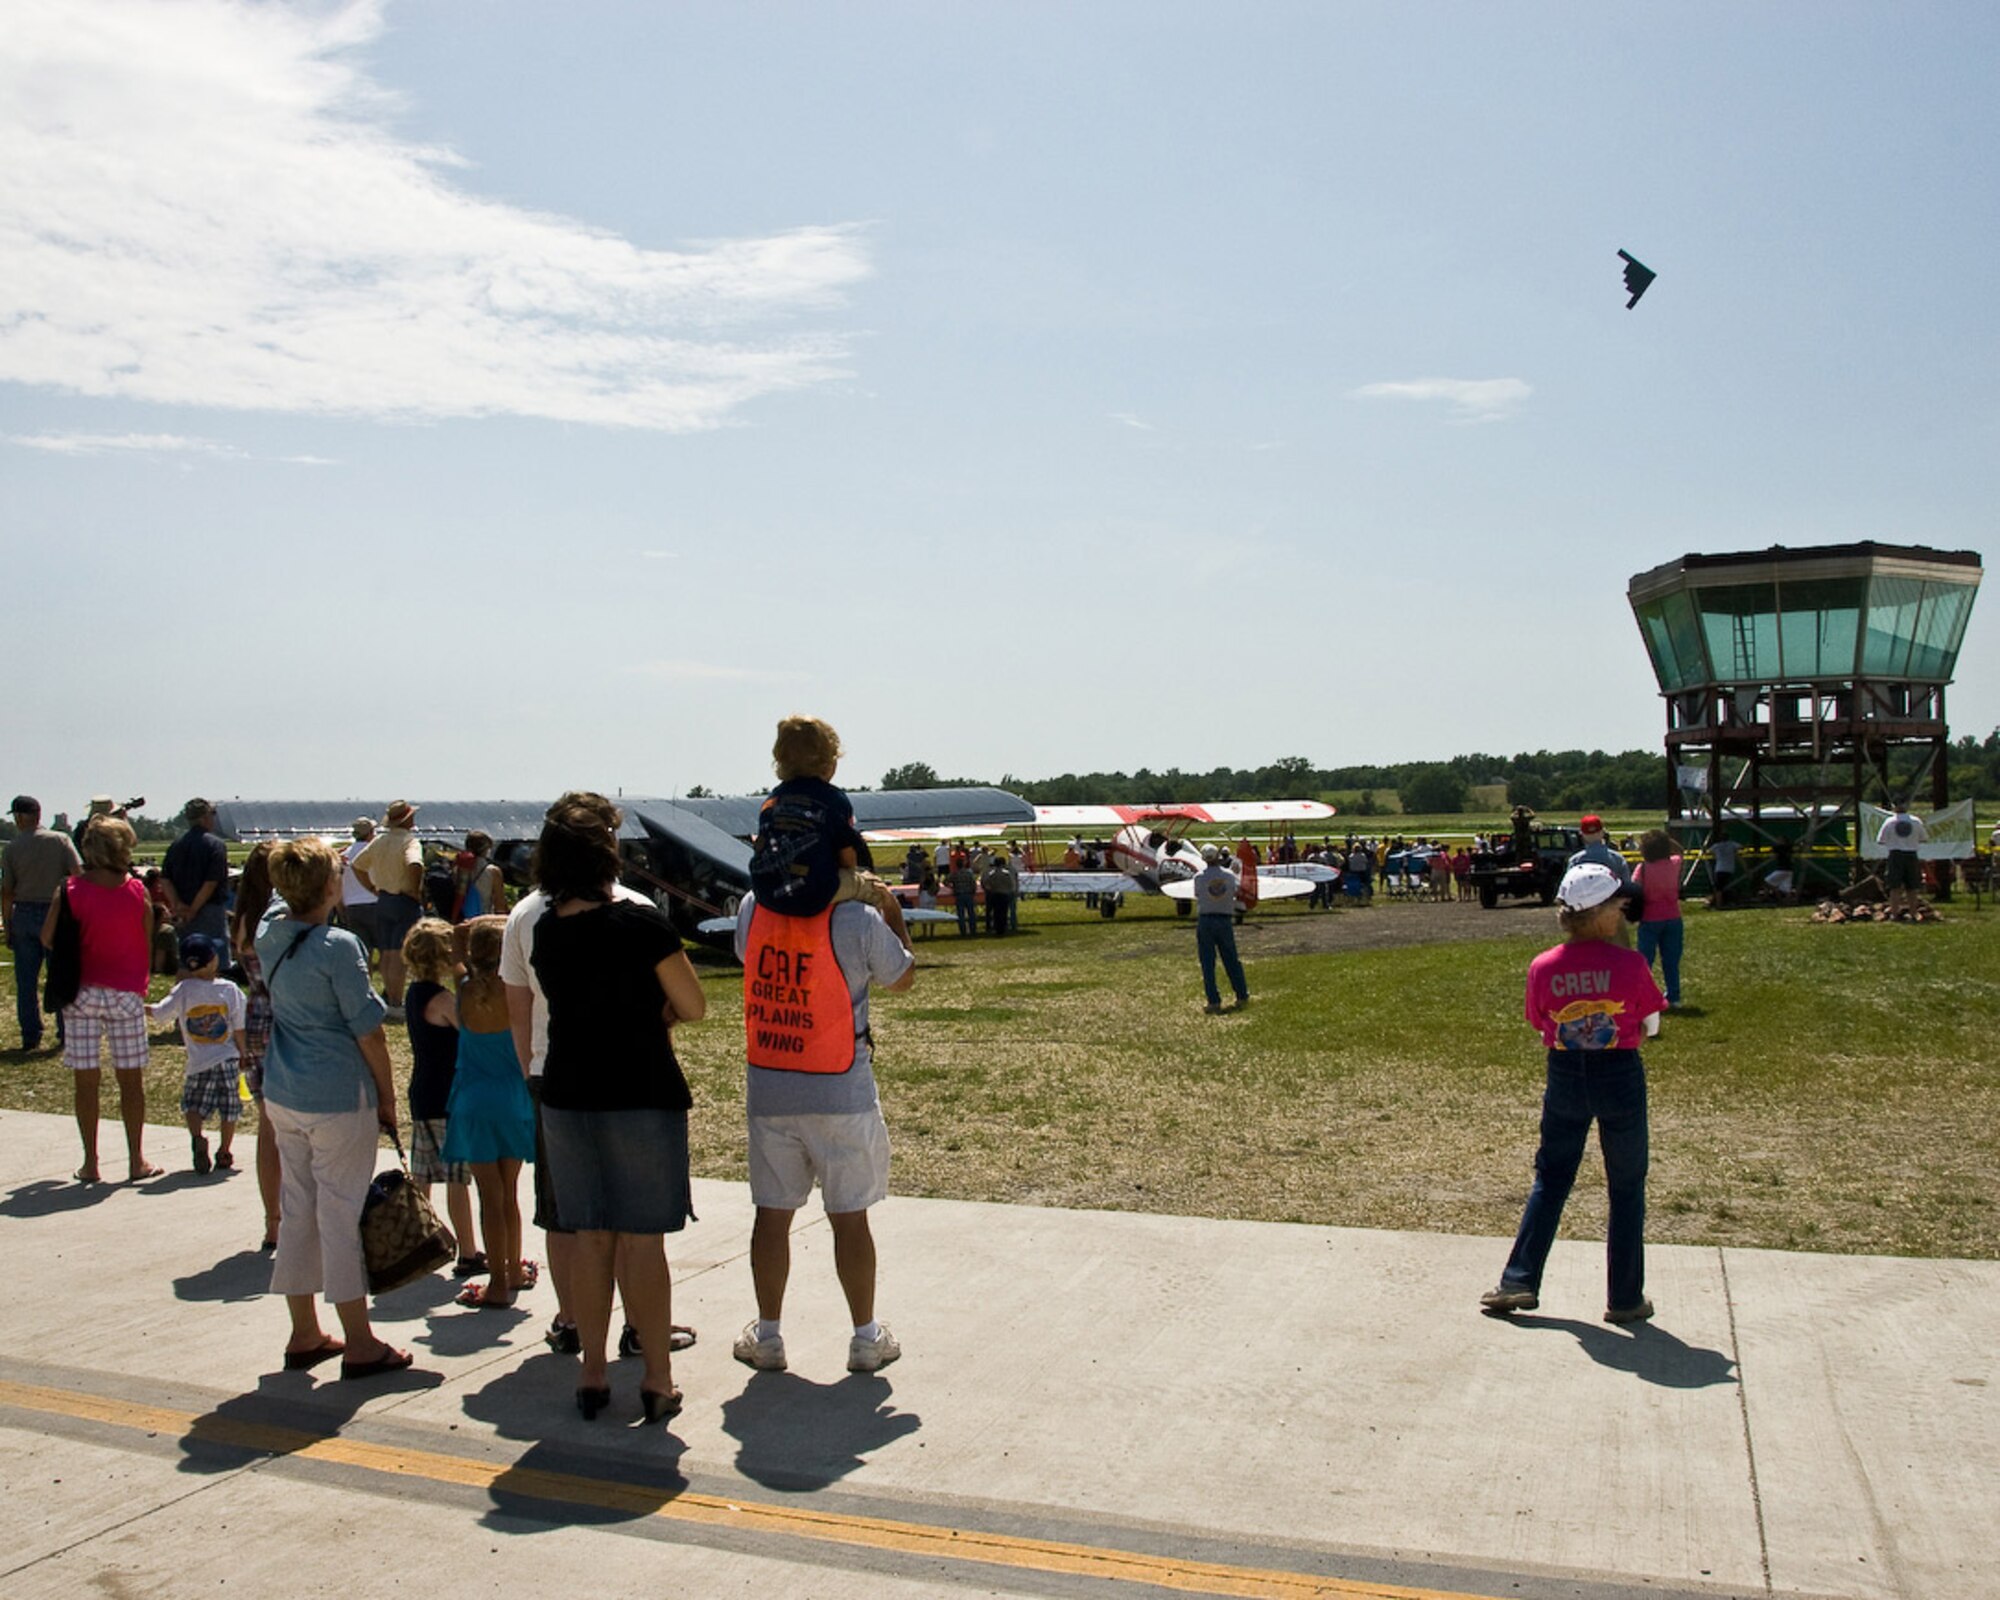 Members of the 139th Airlift Wing participate in the Wing Nuts air show in Tarkio Missouri on July 11, 2009. The air show is an annual event in which the 139th participates in for training purposes and community relations. (U.S. Air Force photo by Master Sgt. Shannon Bond) 
